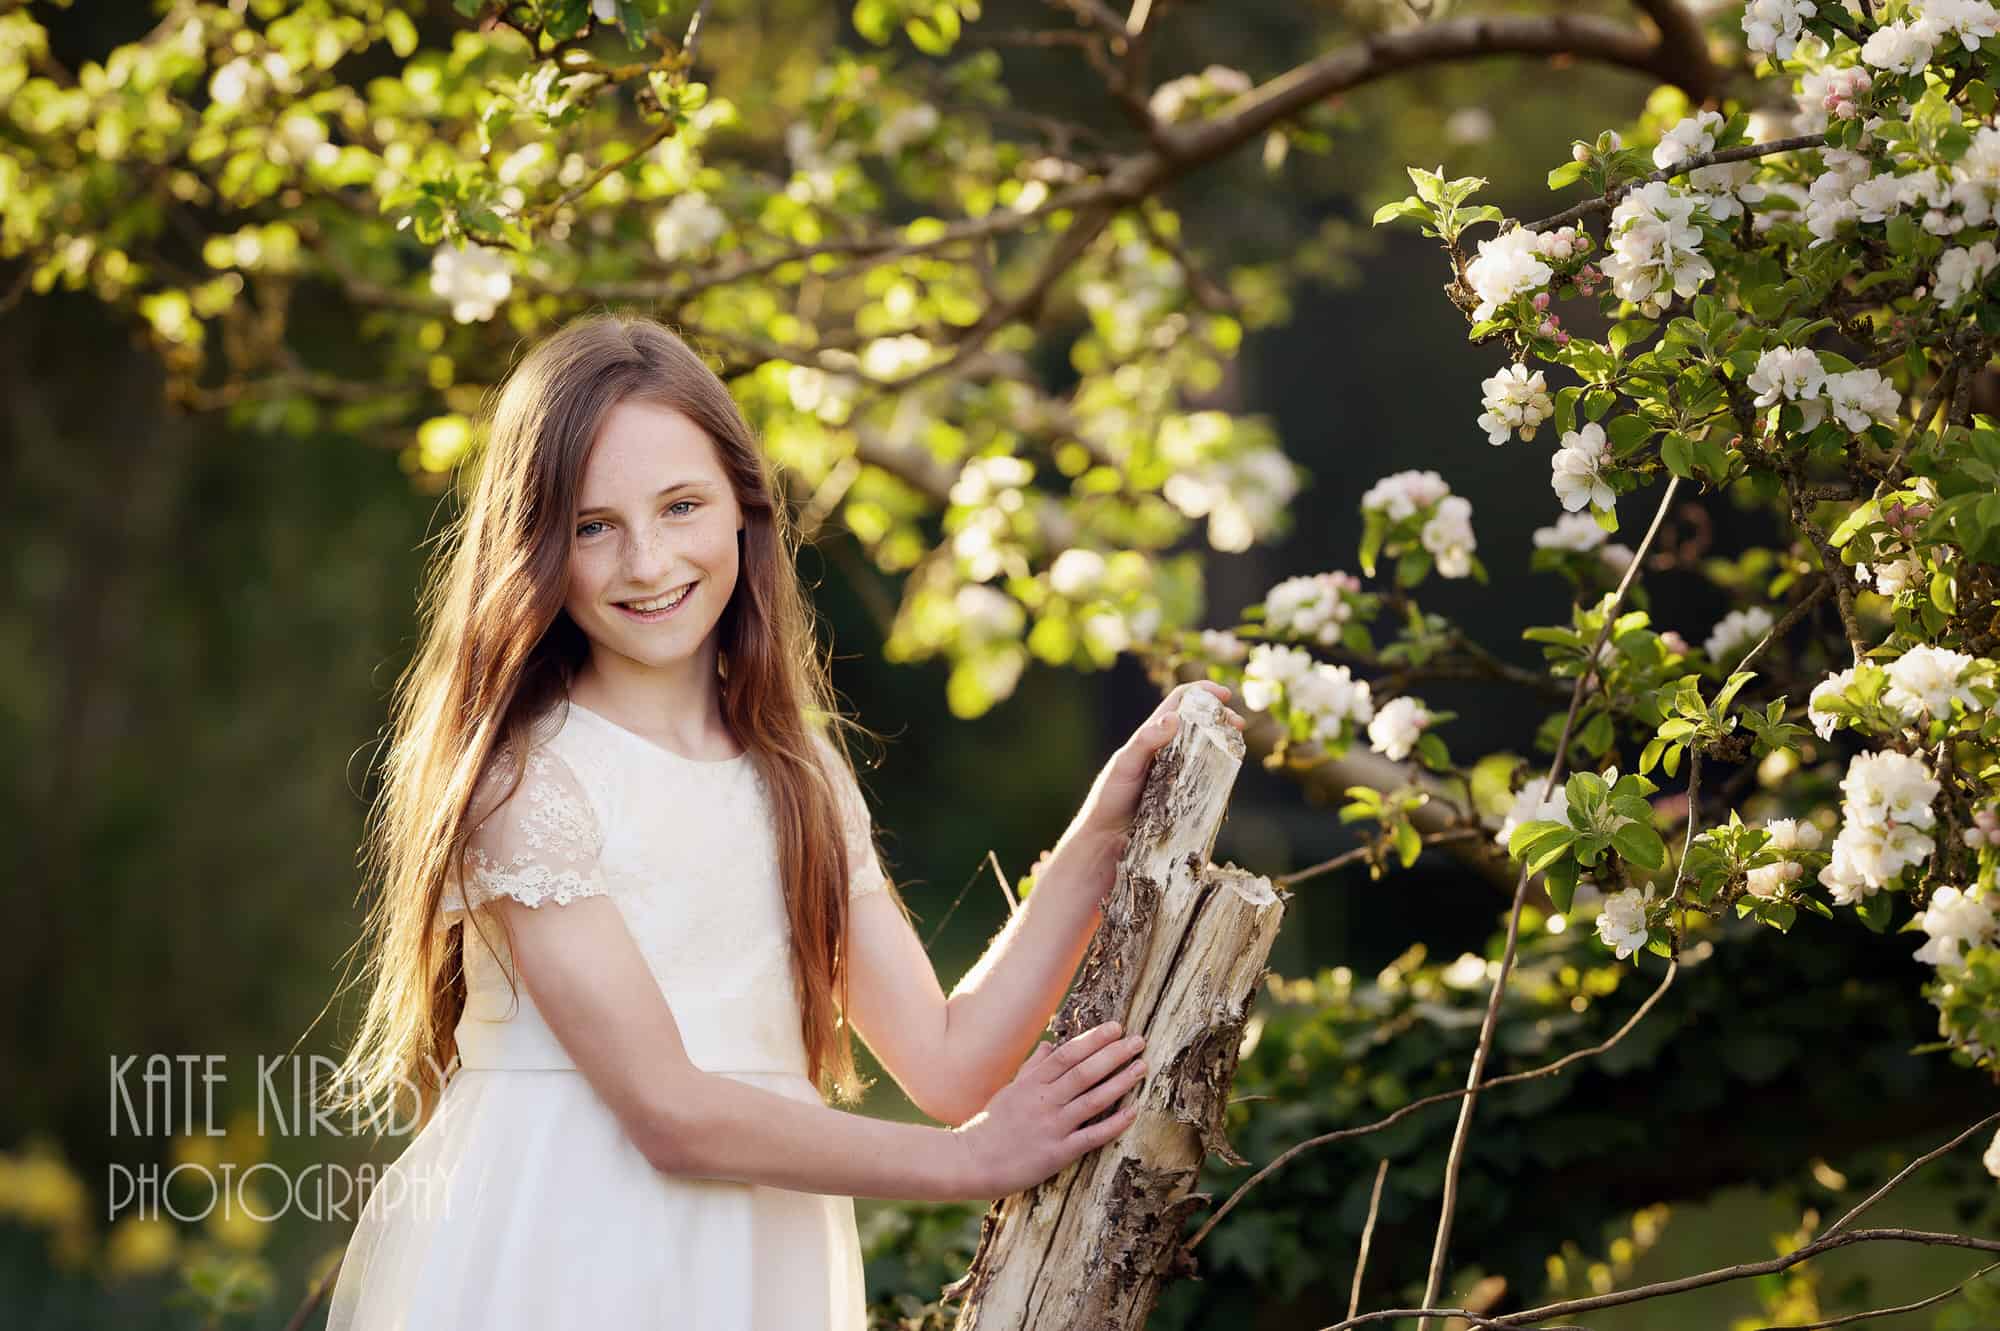 girl in white dress with long drown hair standing next to tree with white blossom